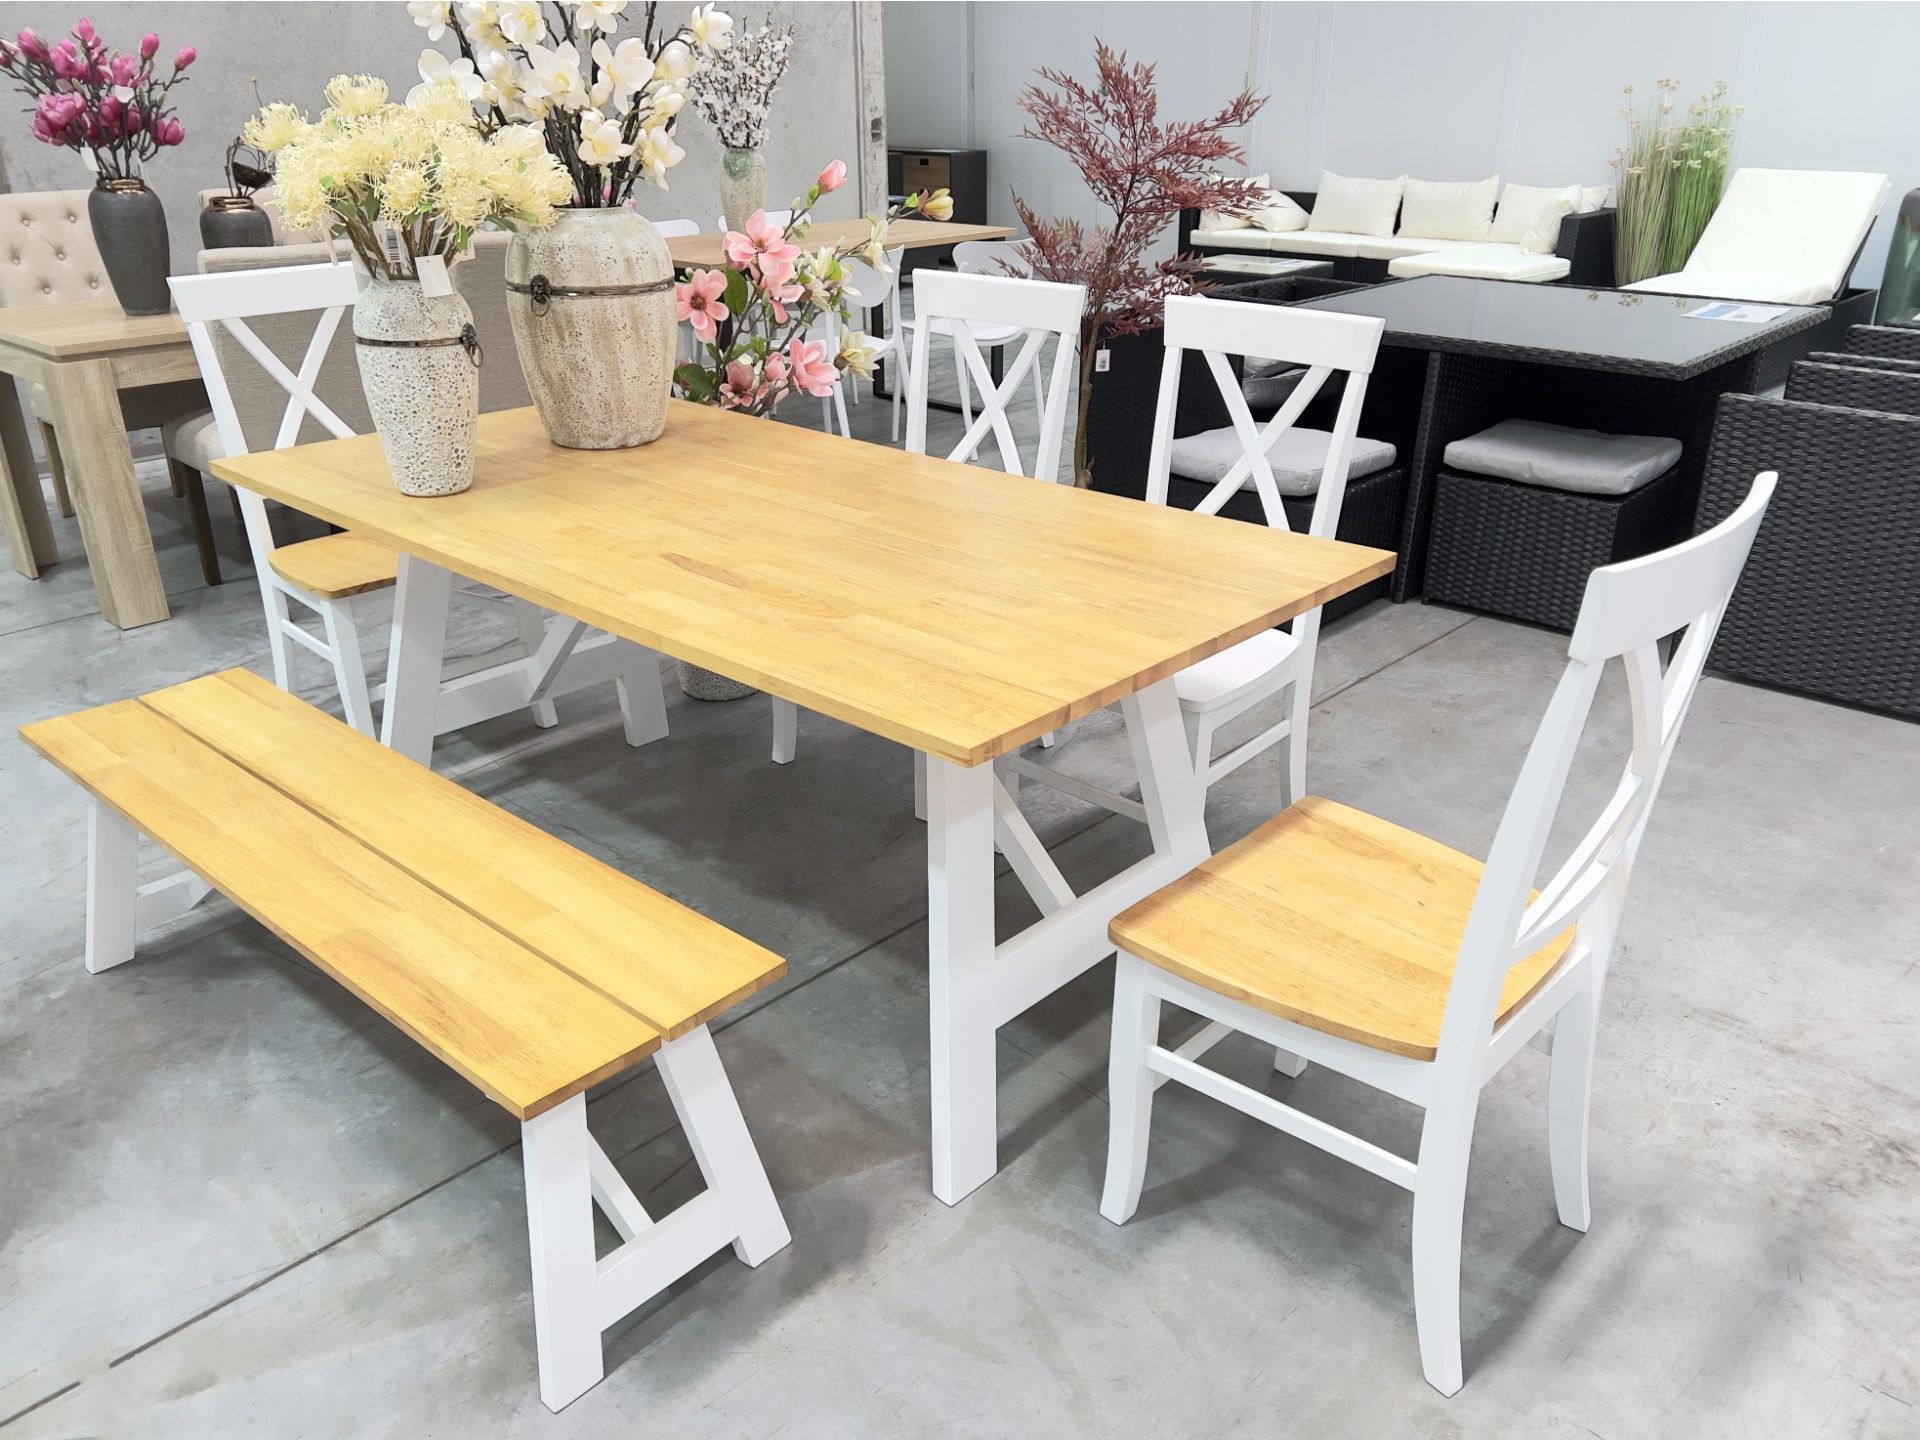 Bali 6 Piece Dining Room Furniture Package - Oak + White